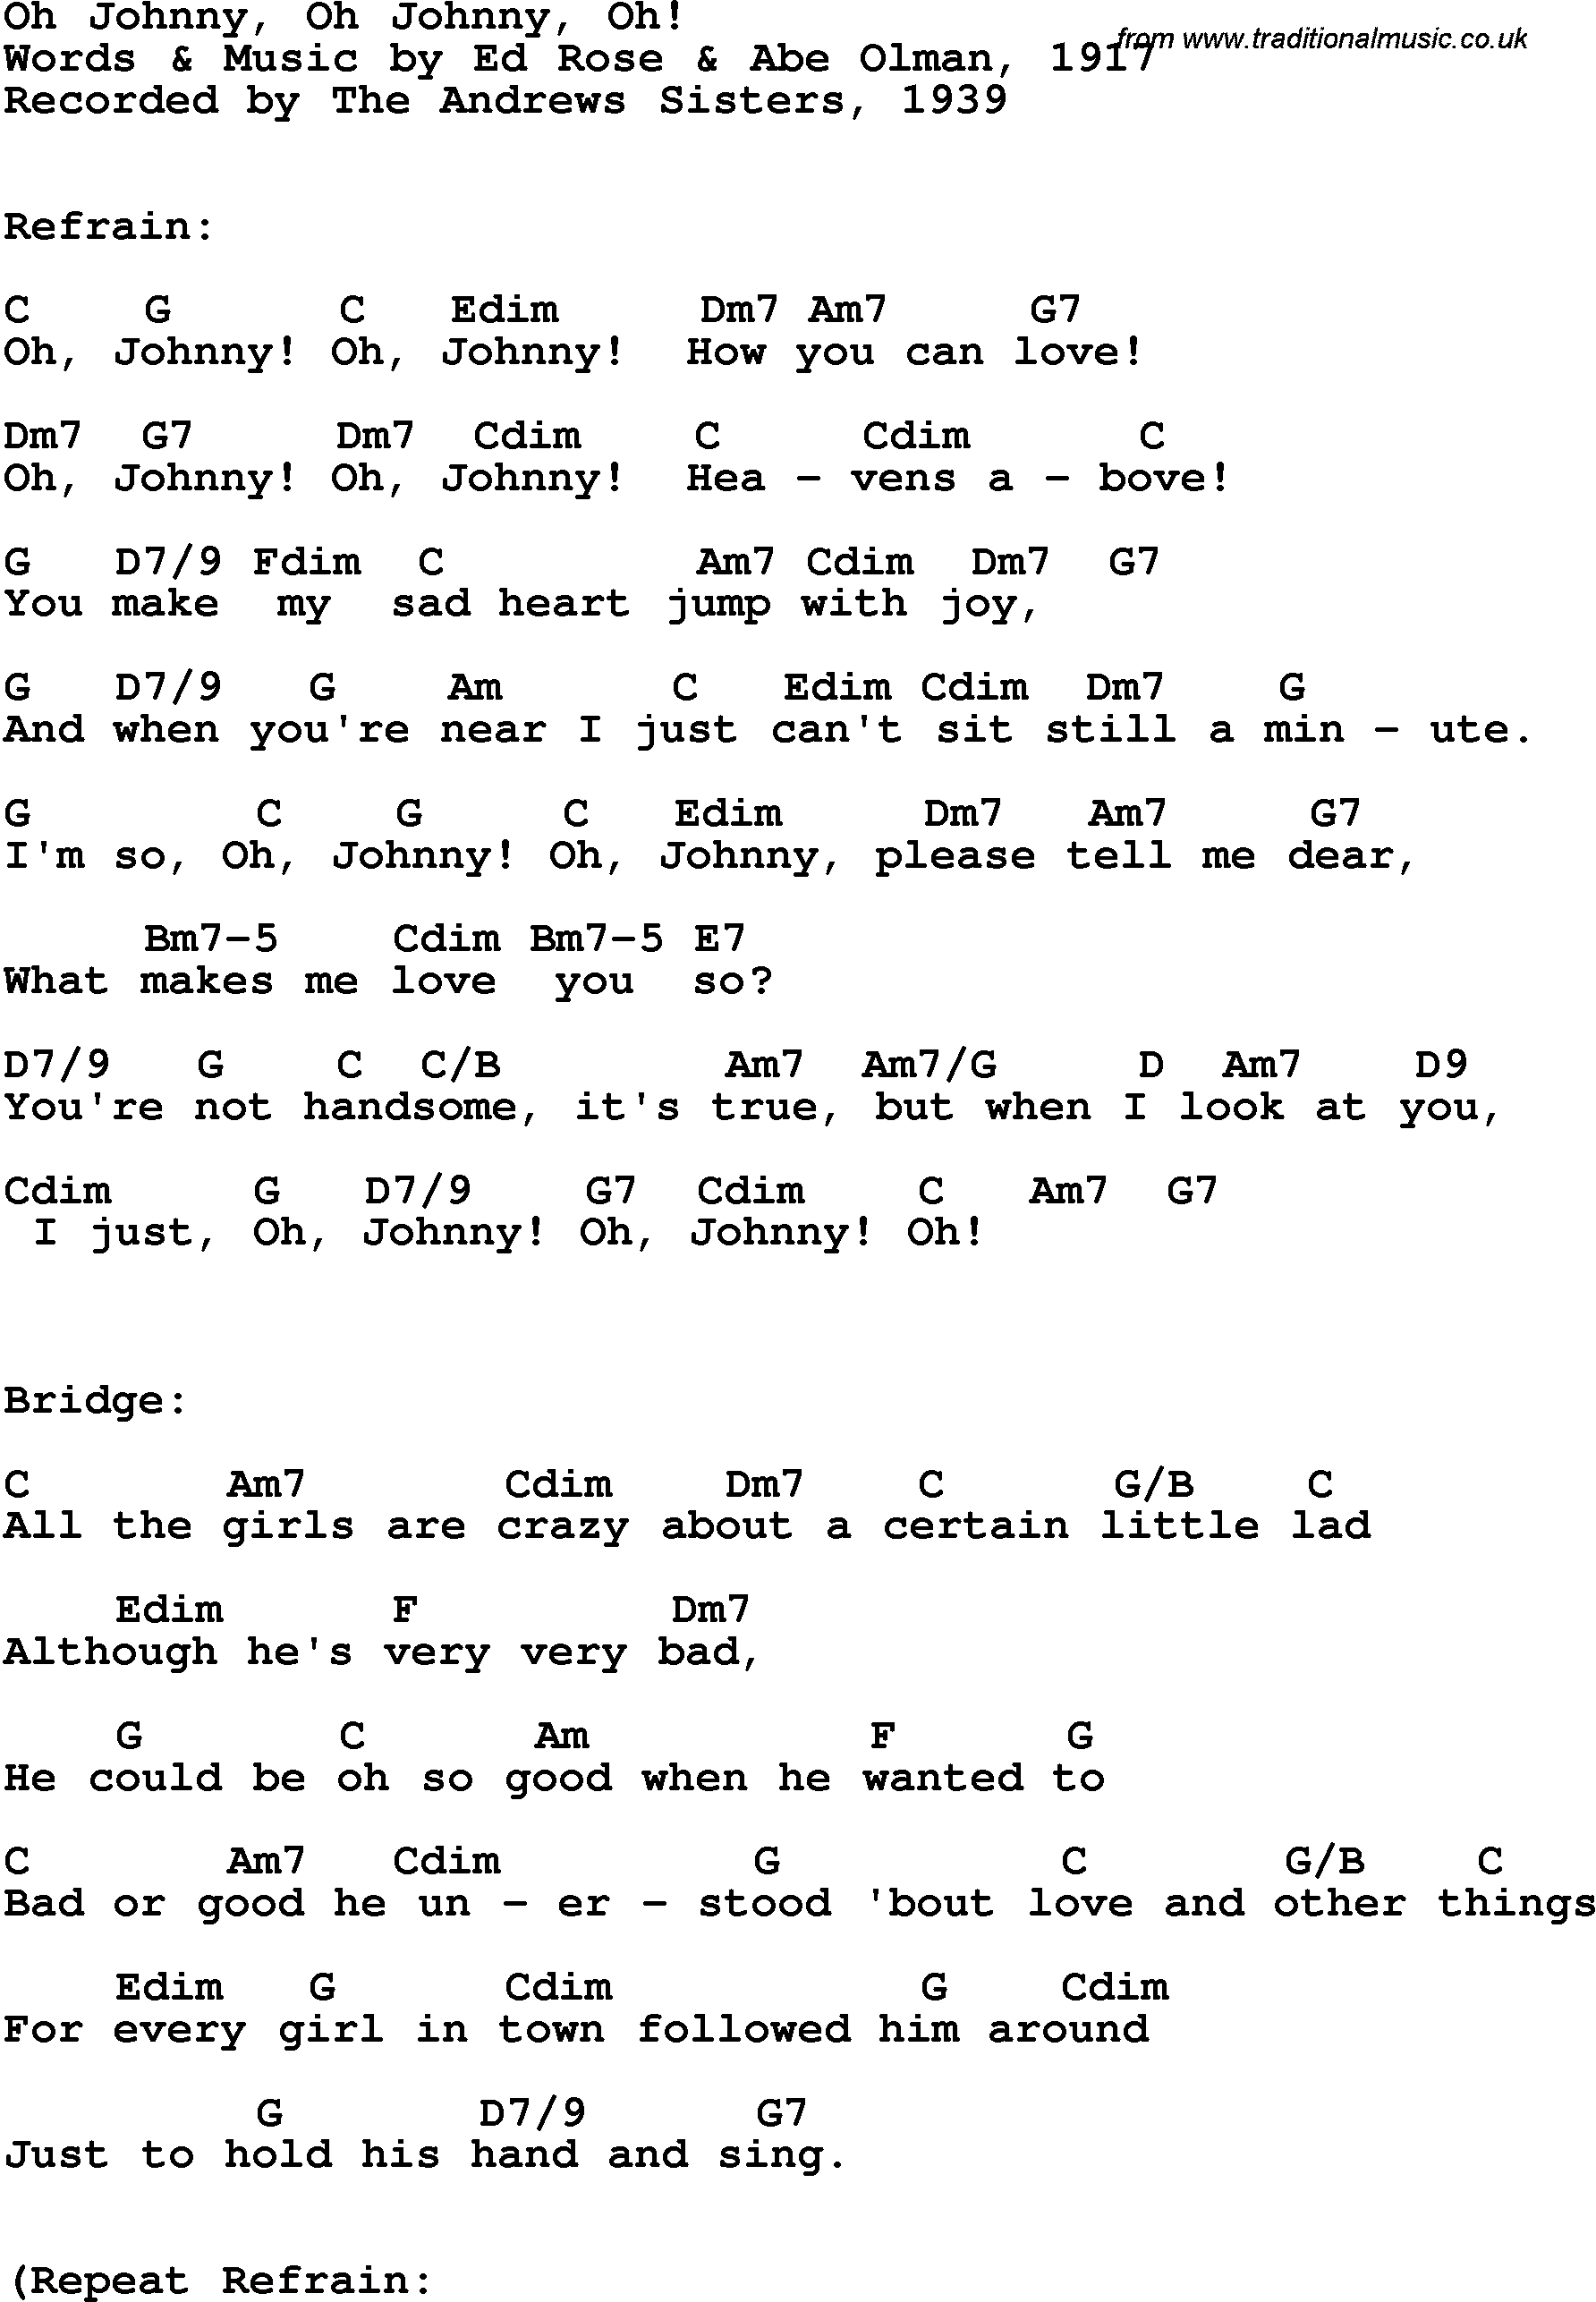 Song Lyrics with guitar chords for Oh Johnny, Oh Johnny, Oh! - The Andrews Sisters, 1939